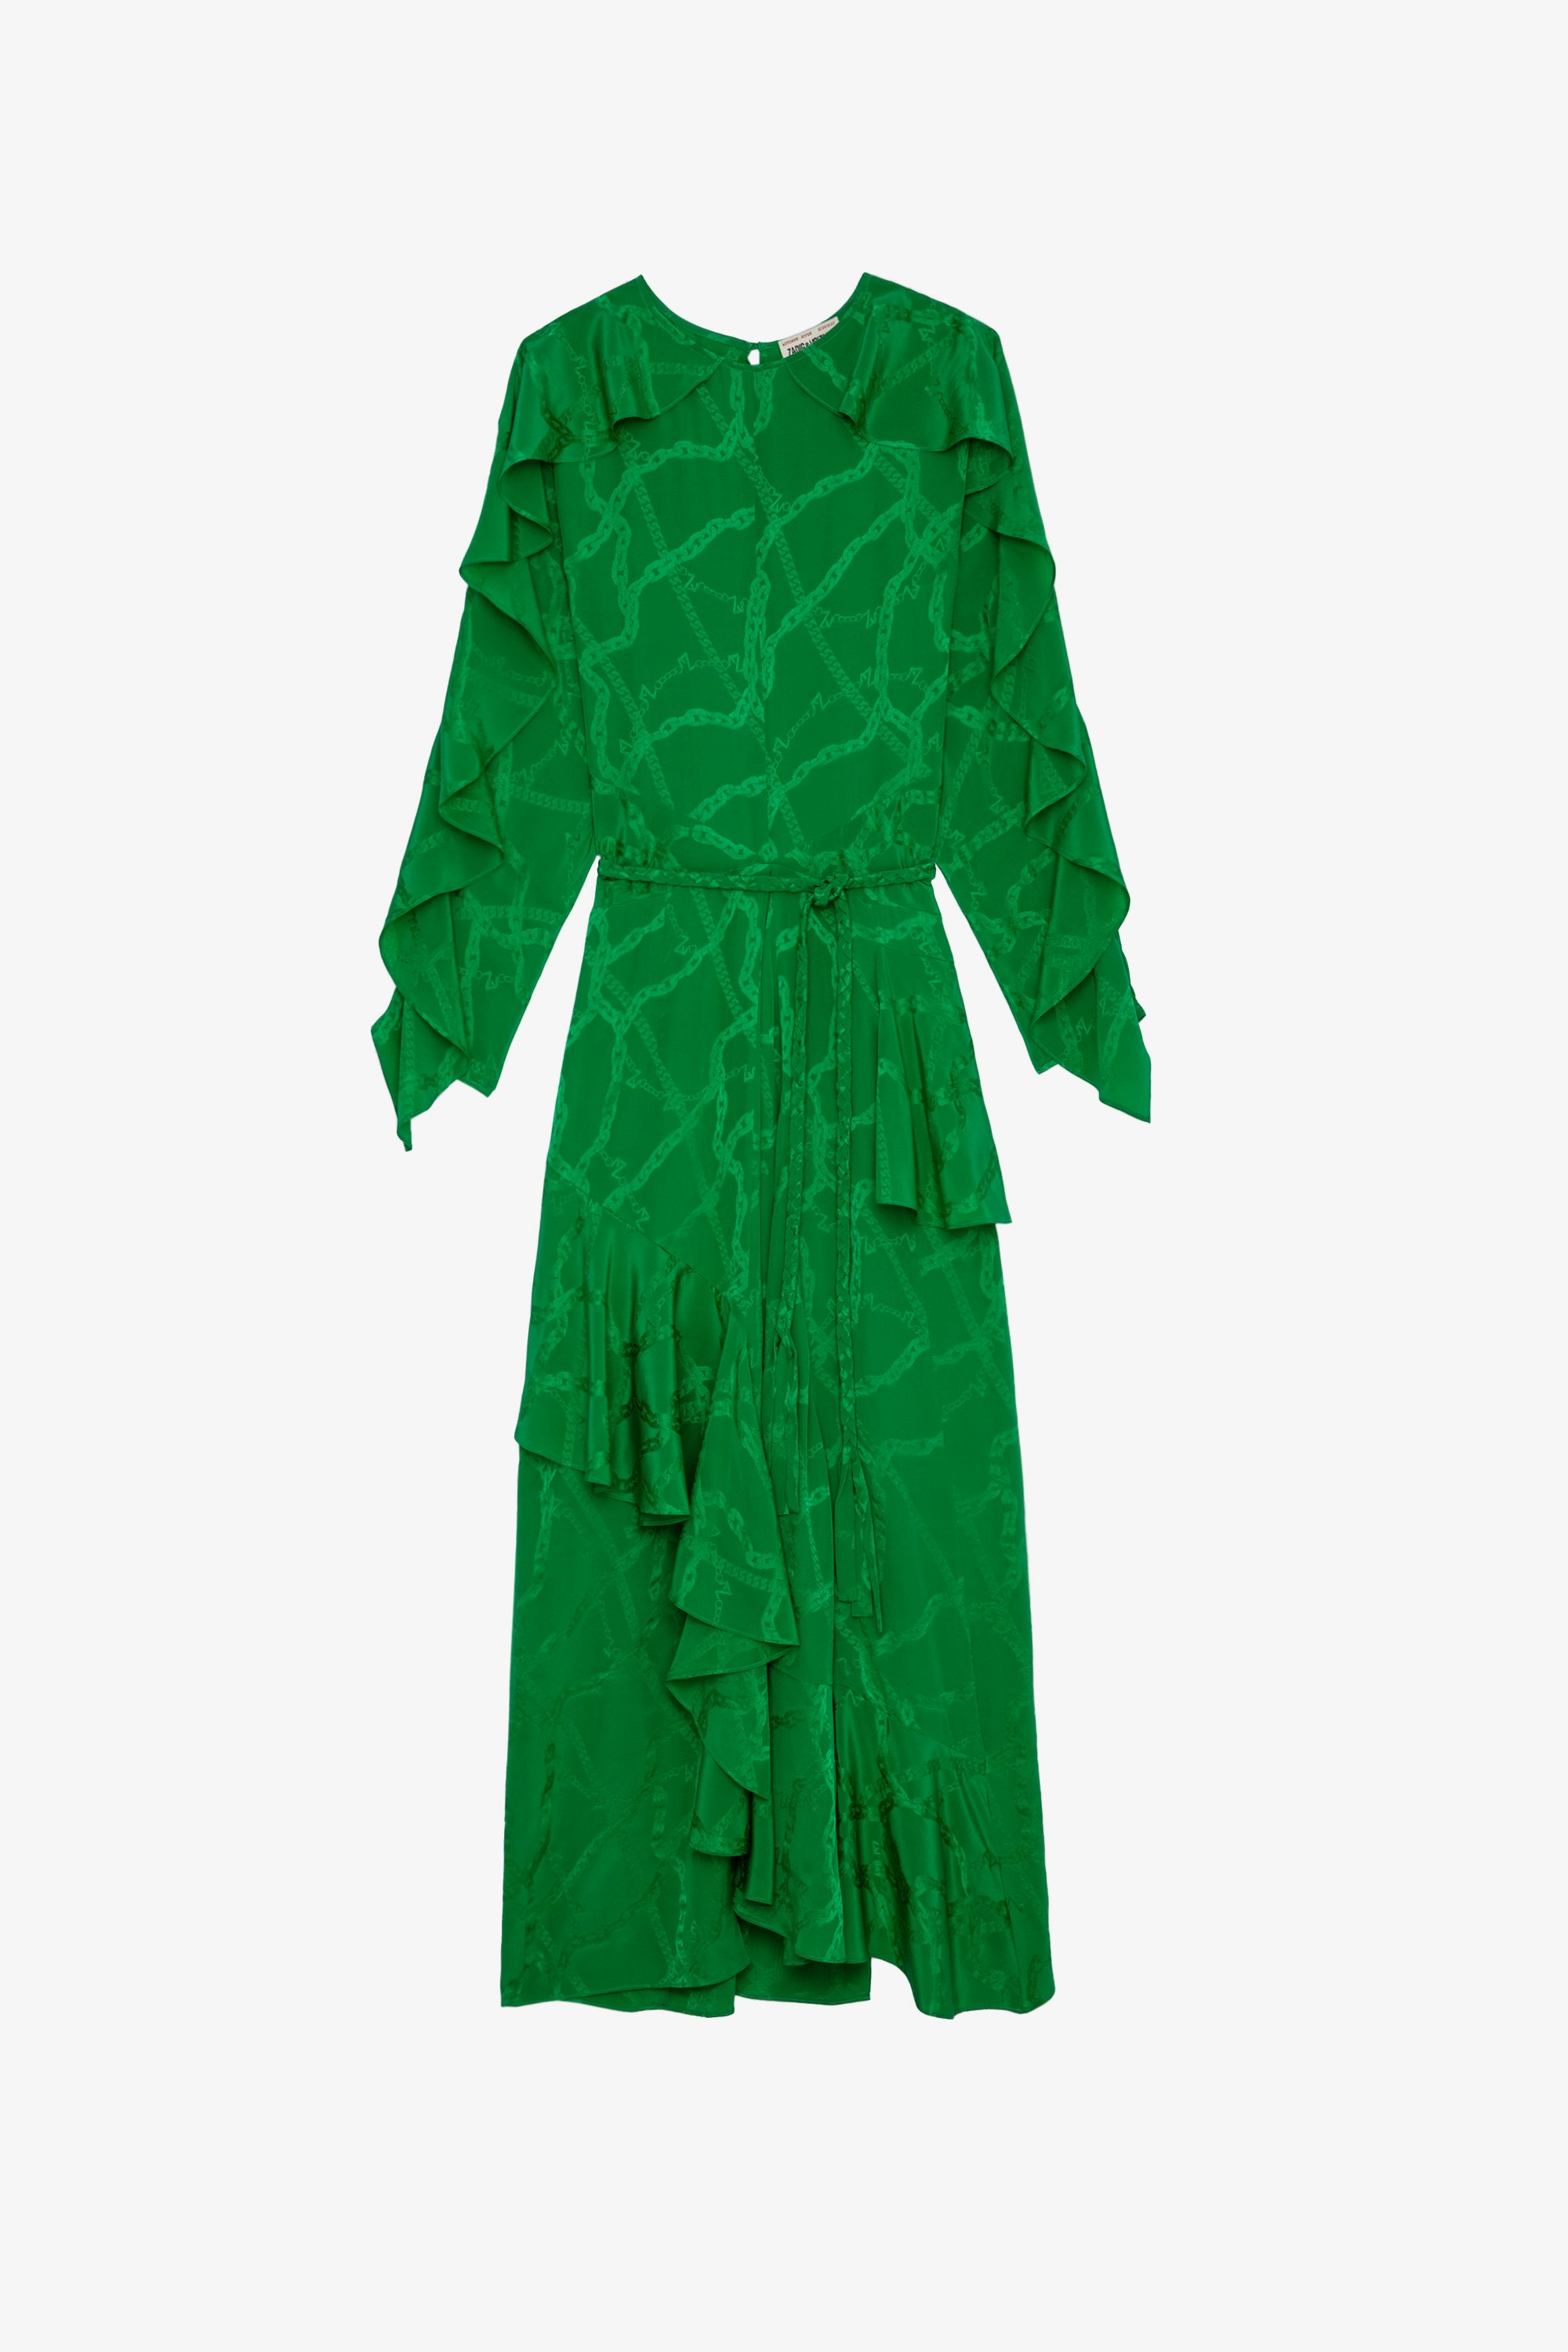 Ritana Chains シルク ドレス Women’s long green silk dress with draped effect, decorated with jacquard ZV chains, tied with a braided belt at the waist 